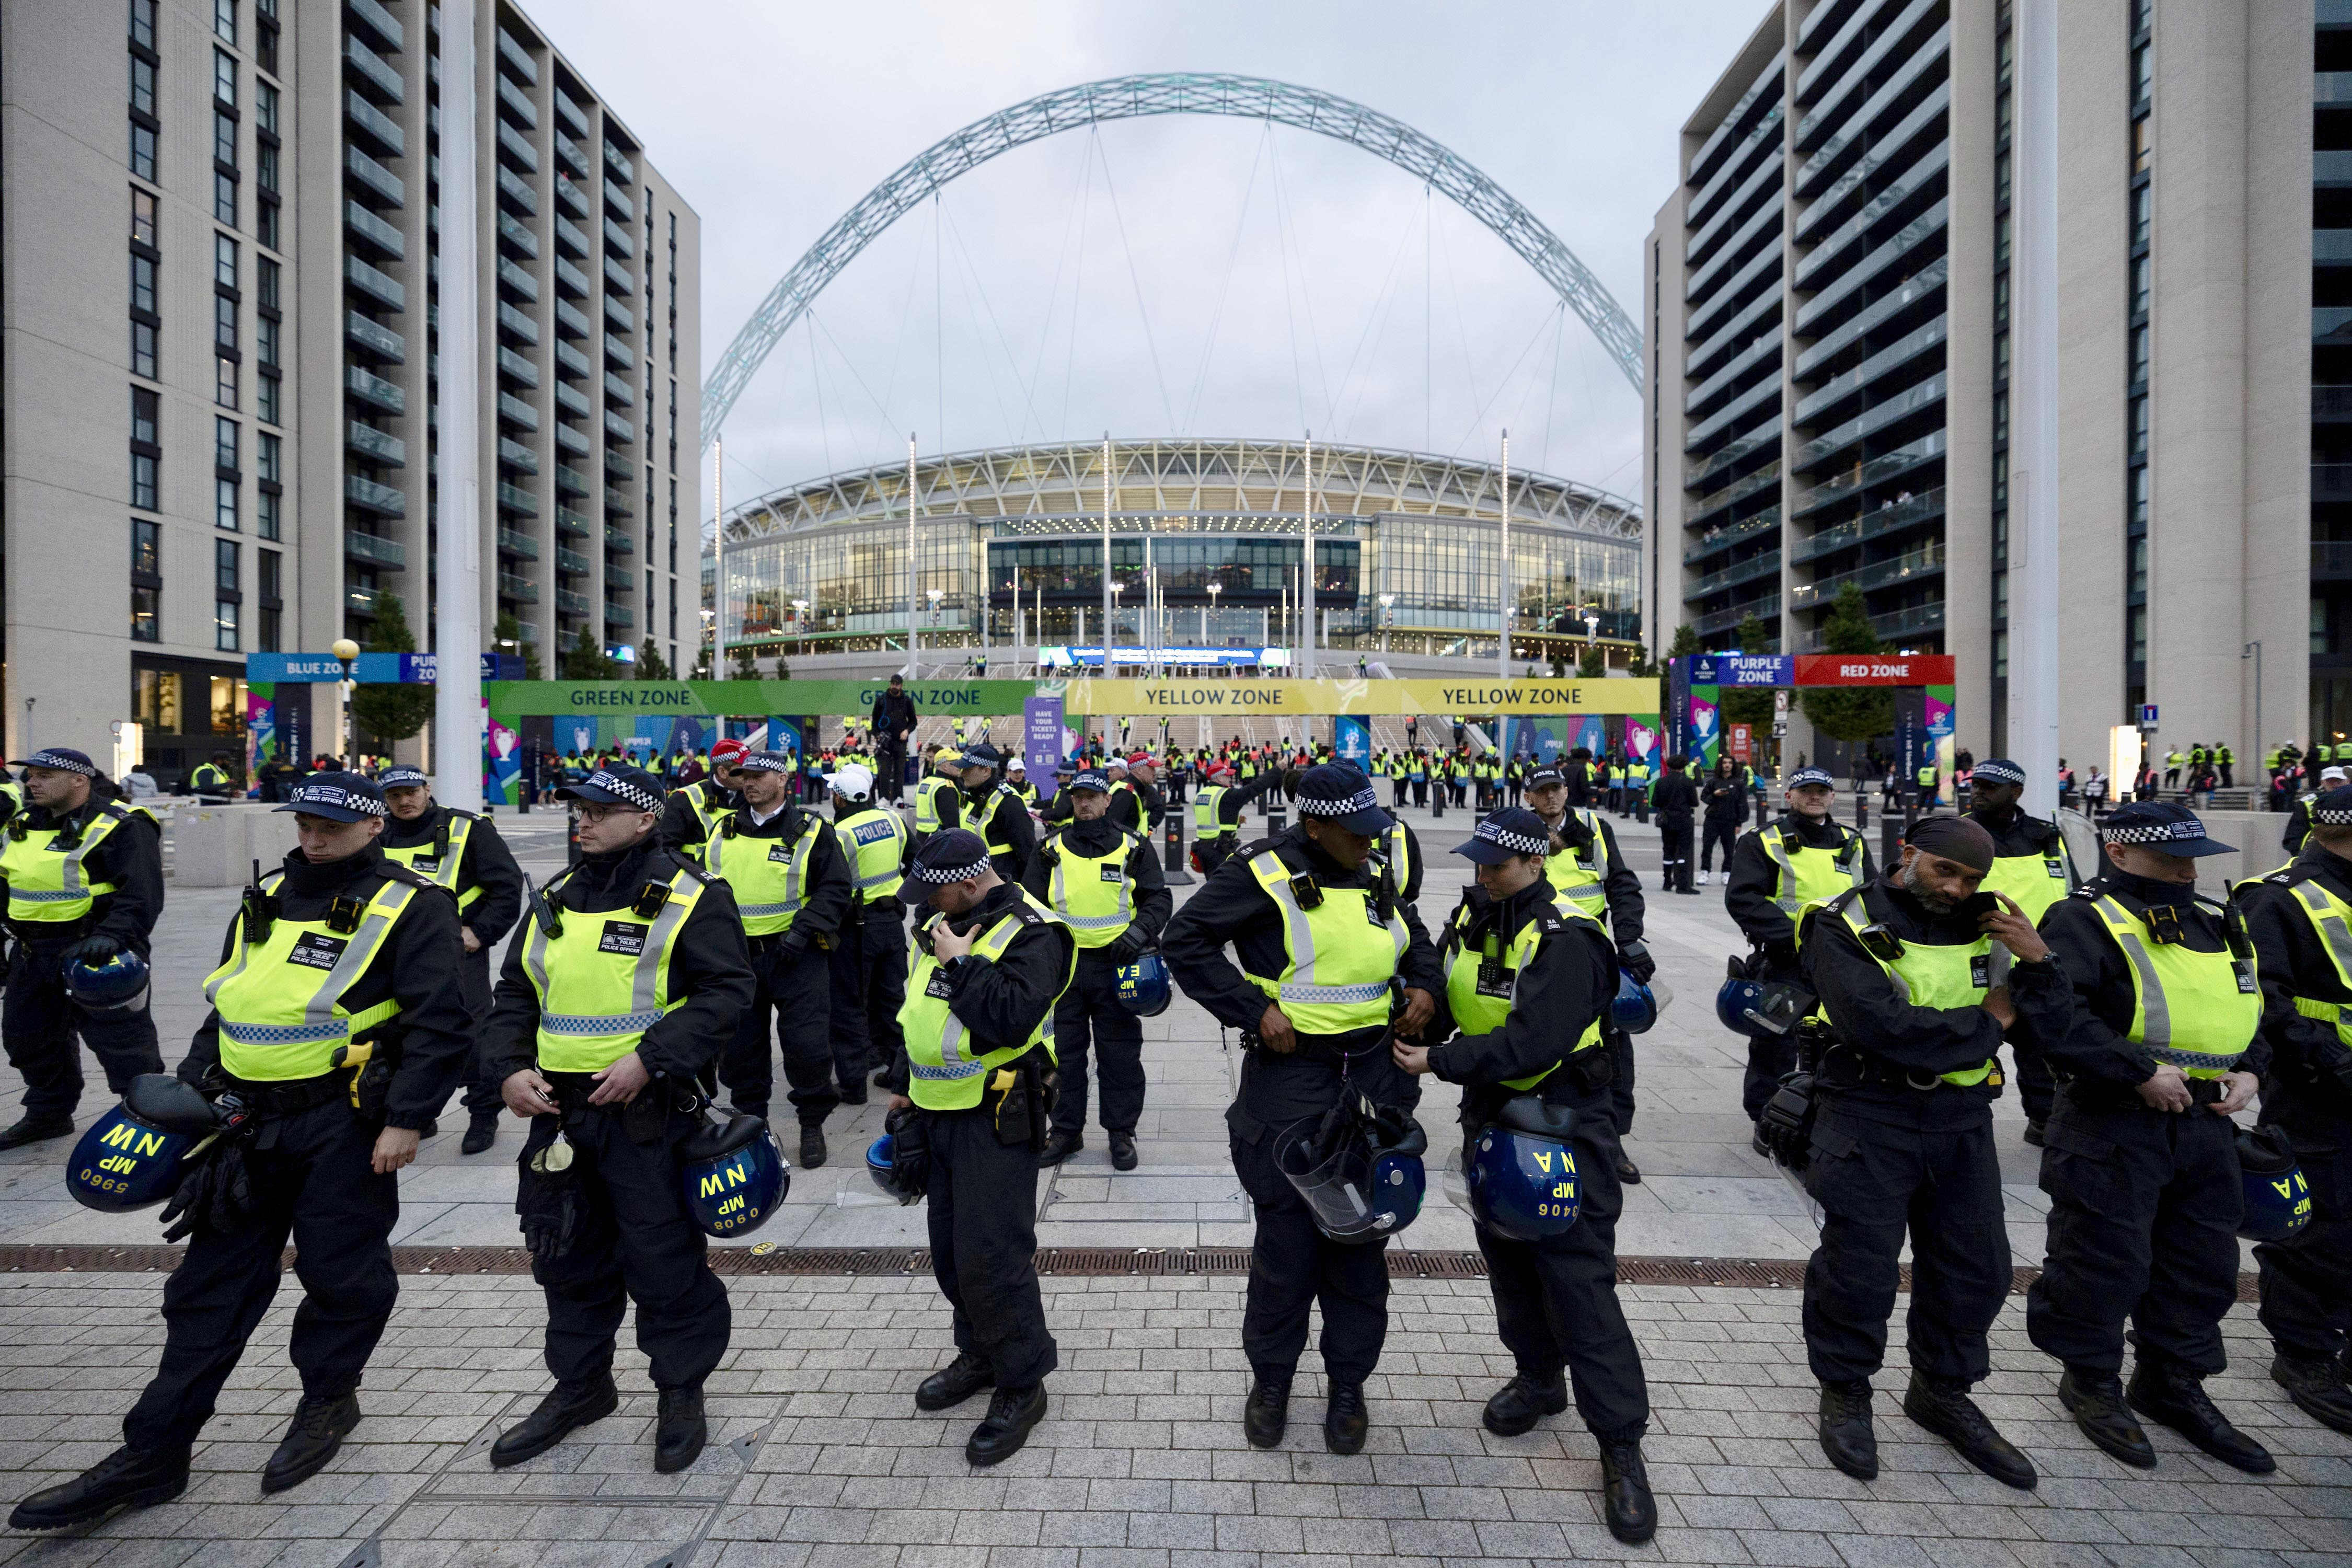 Cops were out in force at Wembley eiqreidrqiudinv